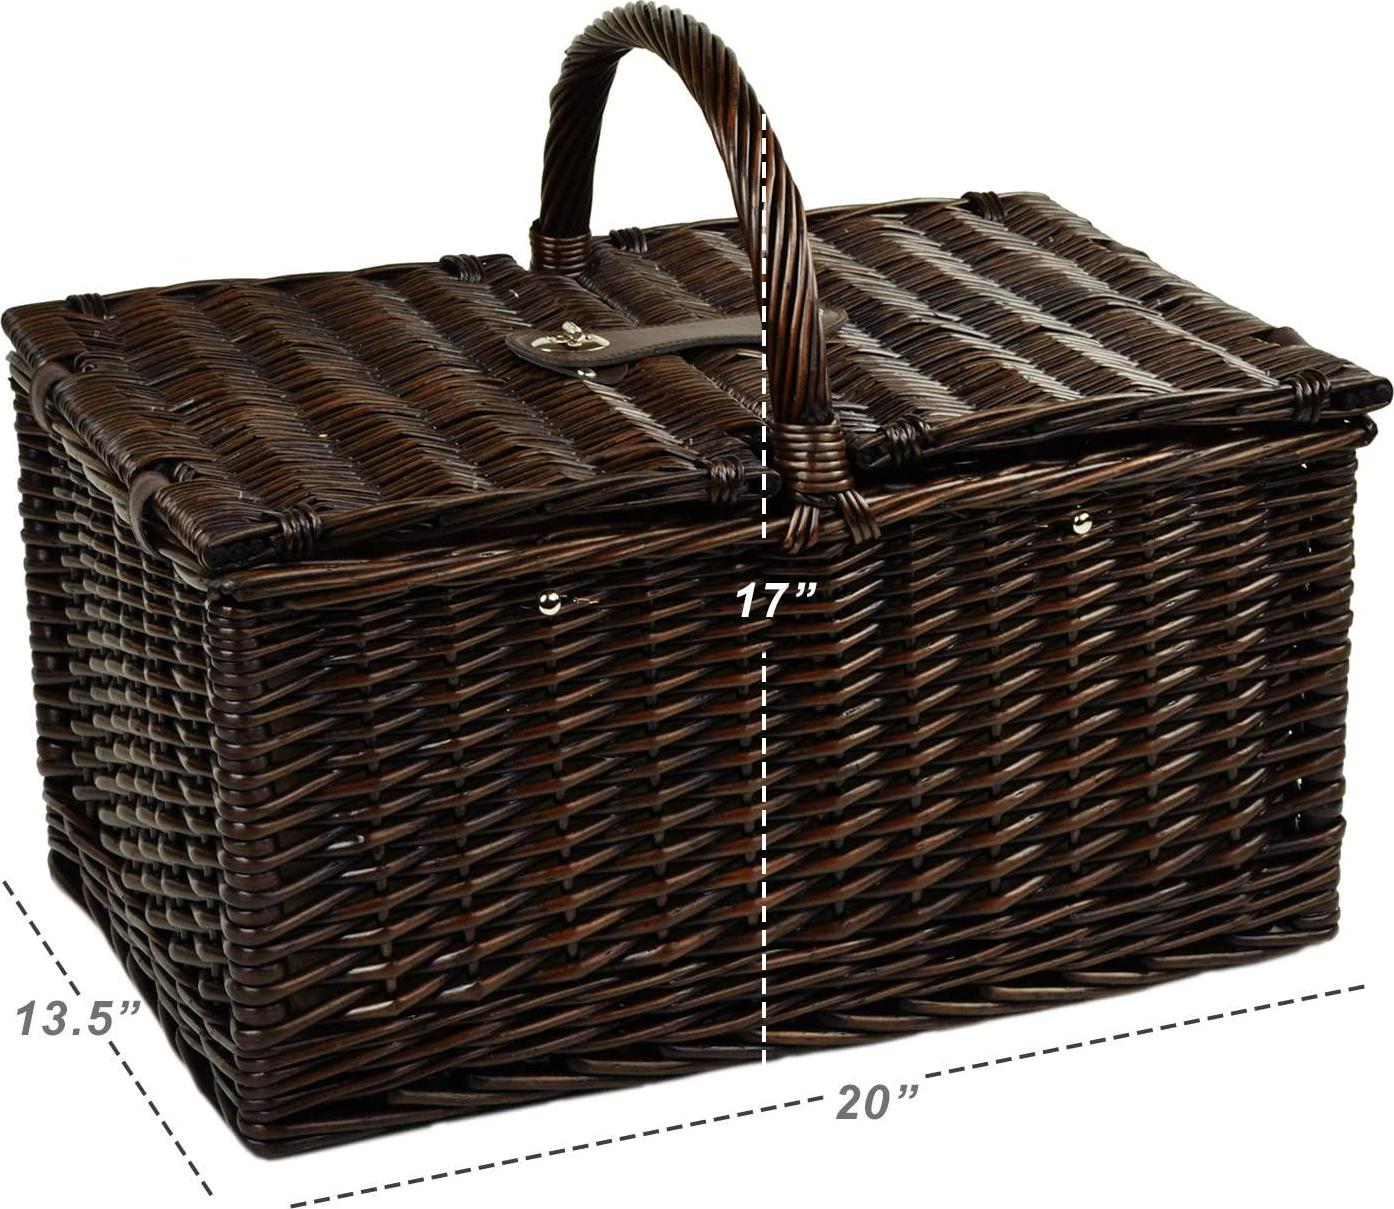 Picnic at Ascot Surrey Willow Picnic Basket with Service for 2 with Blanket - London Plaid